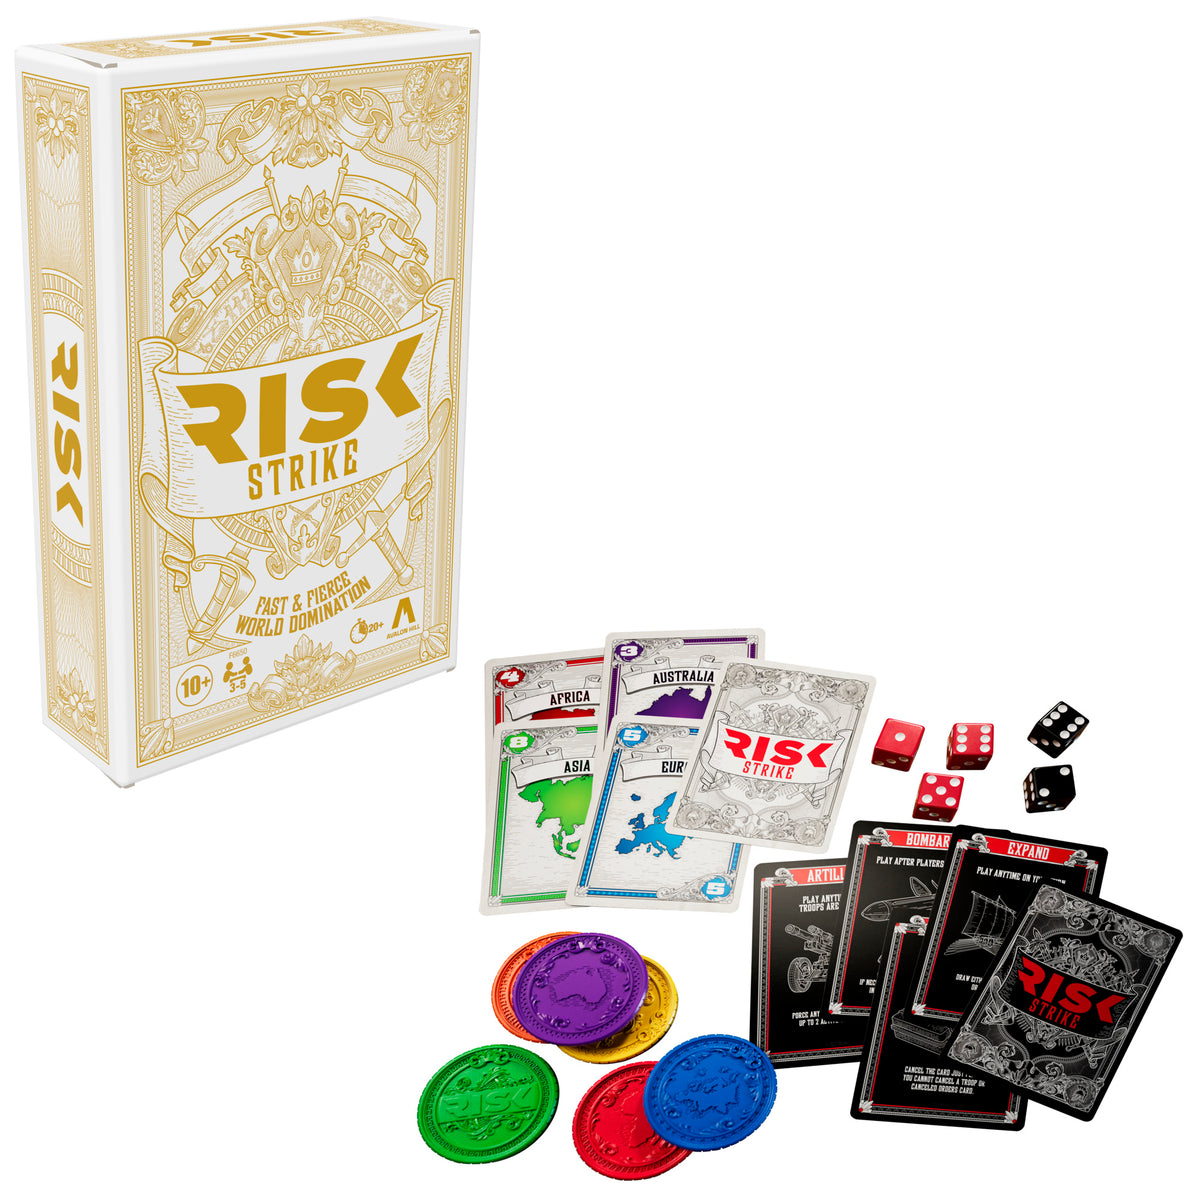 Phase 10 The Board Game Rules version 1.0